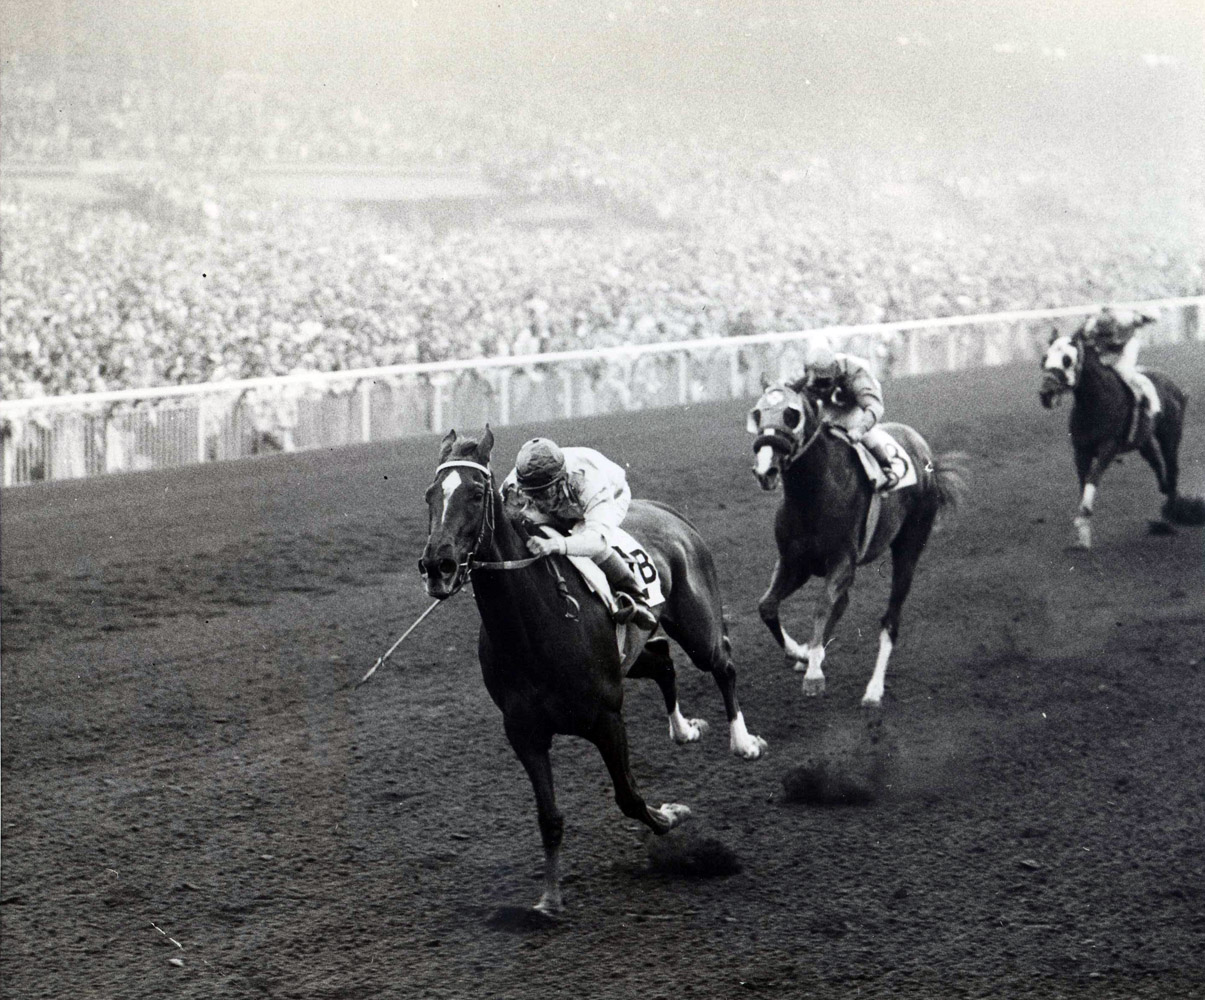 Silver Spoon (Ray York up) winning the 1959 Santa Anita Derby (UPI Telephoto/Museum Collection)